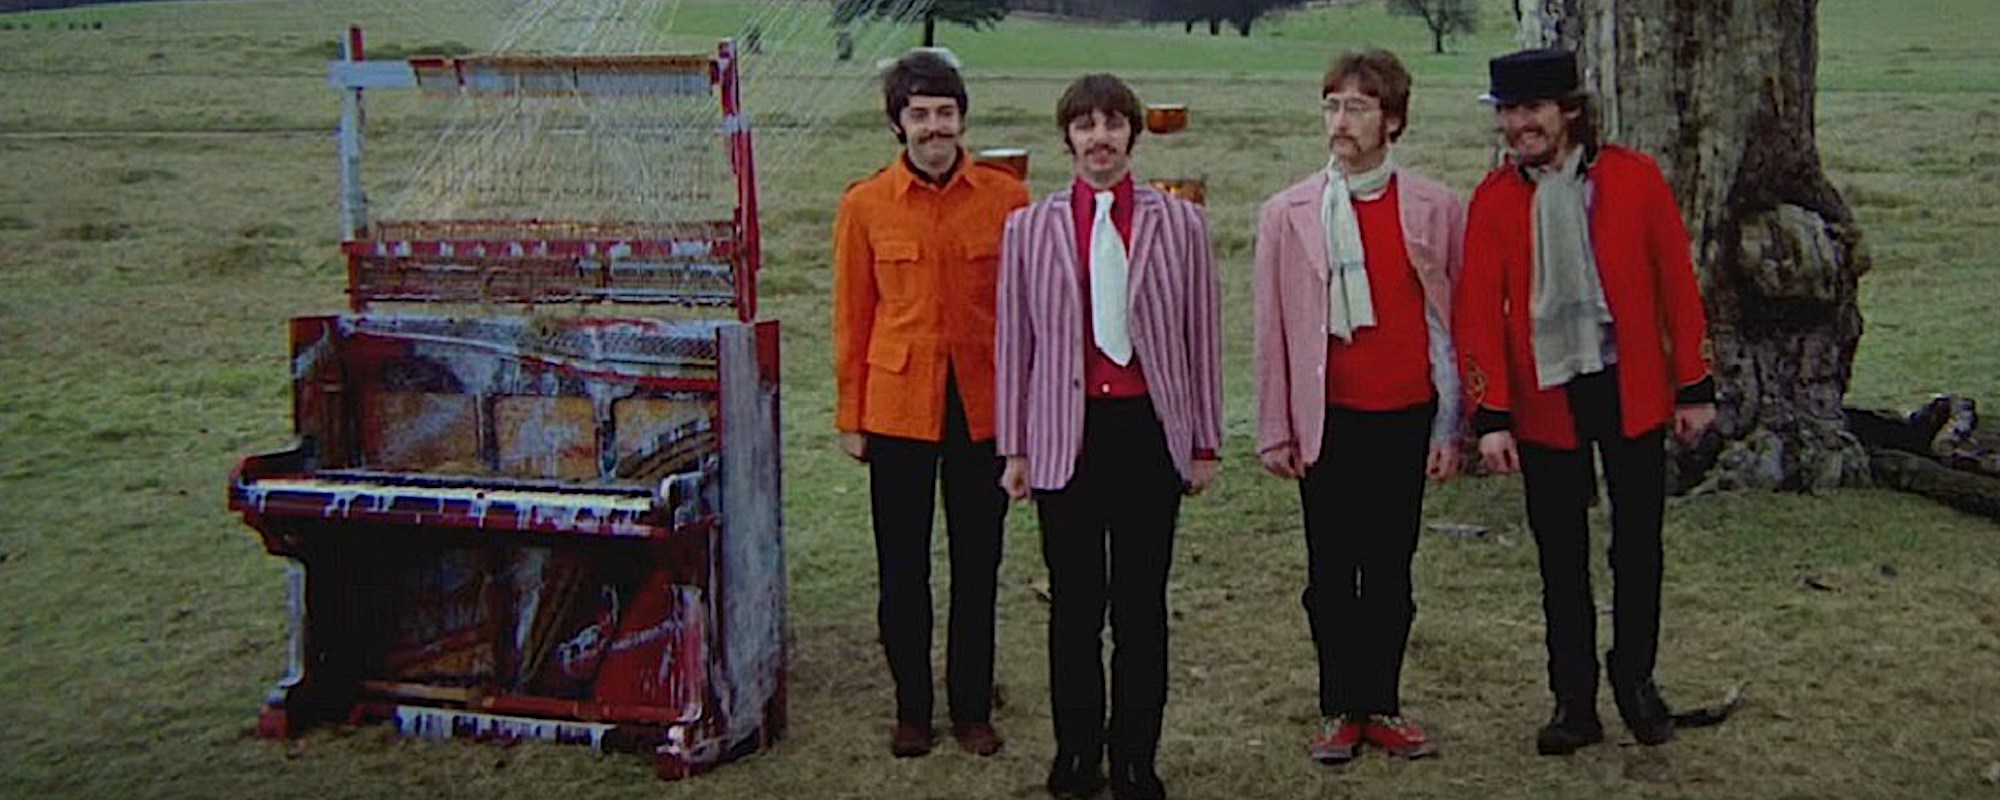 The Meaning Behind The Beatles’ 1967 Classic “Strawberry Fields Forever”